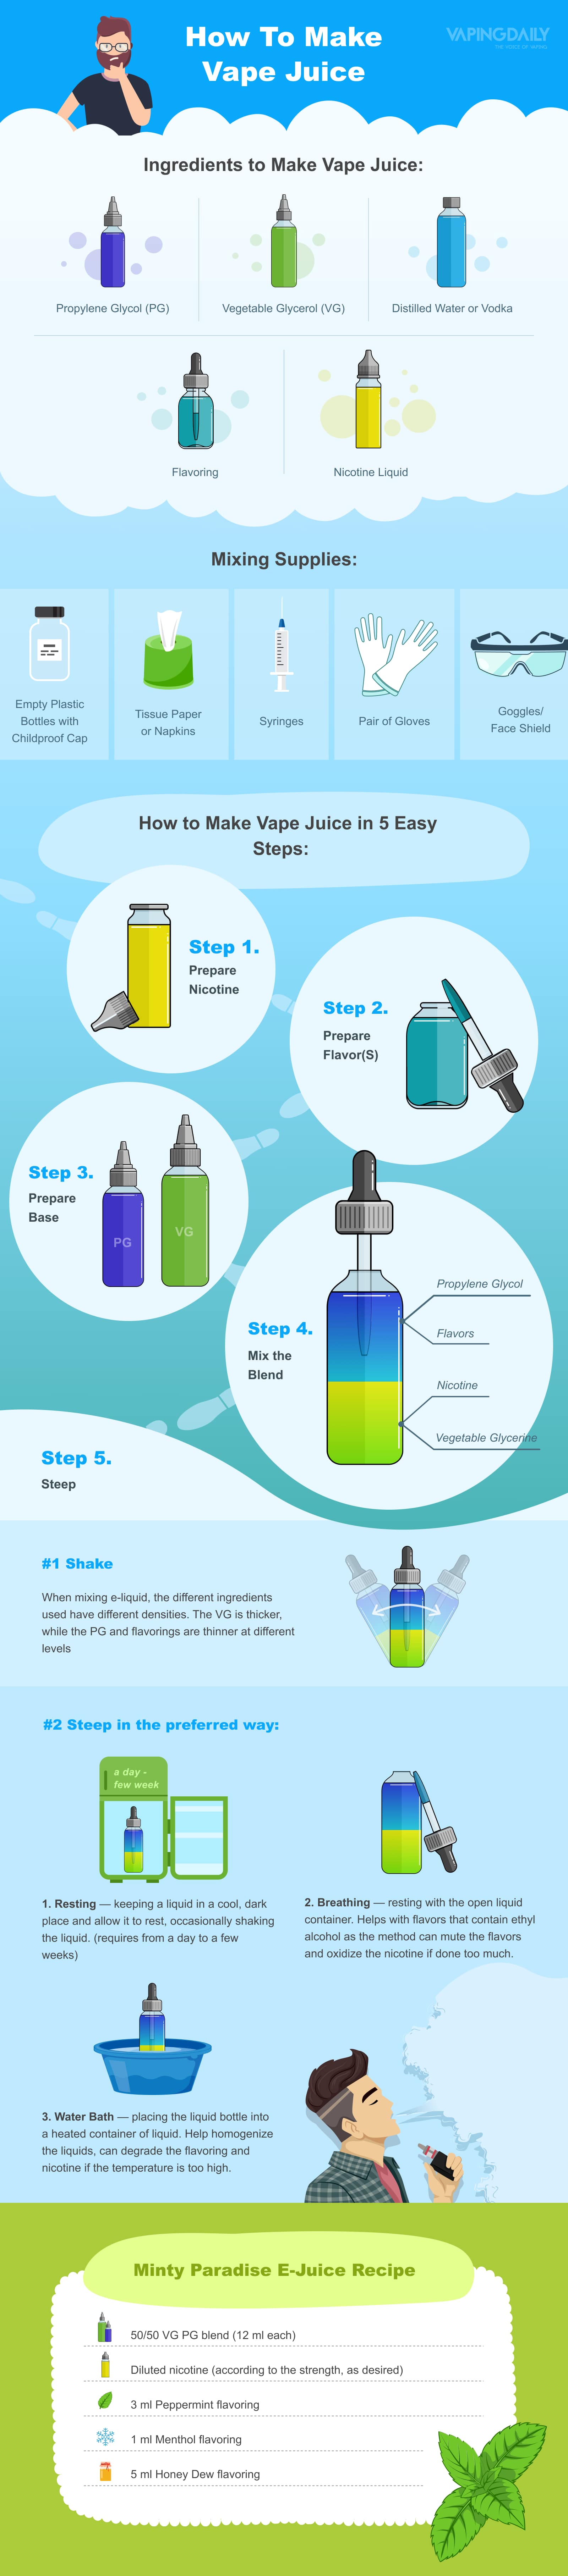 How To Make Diy Vape Juice Simple And Affordable Ways